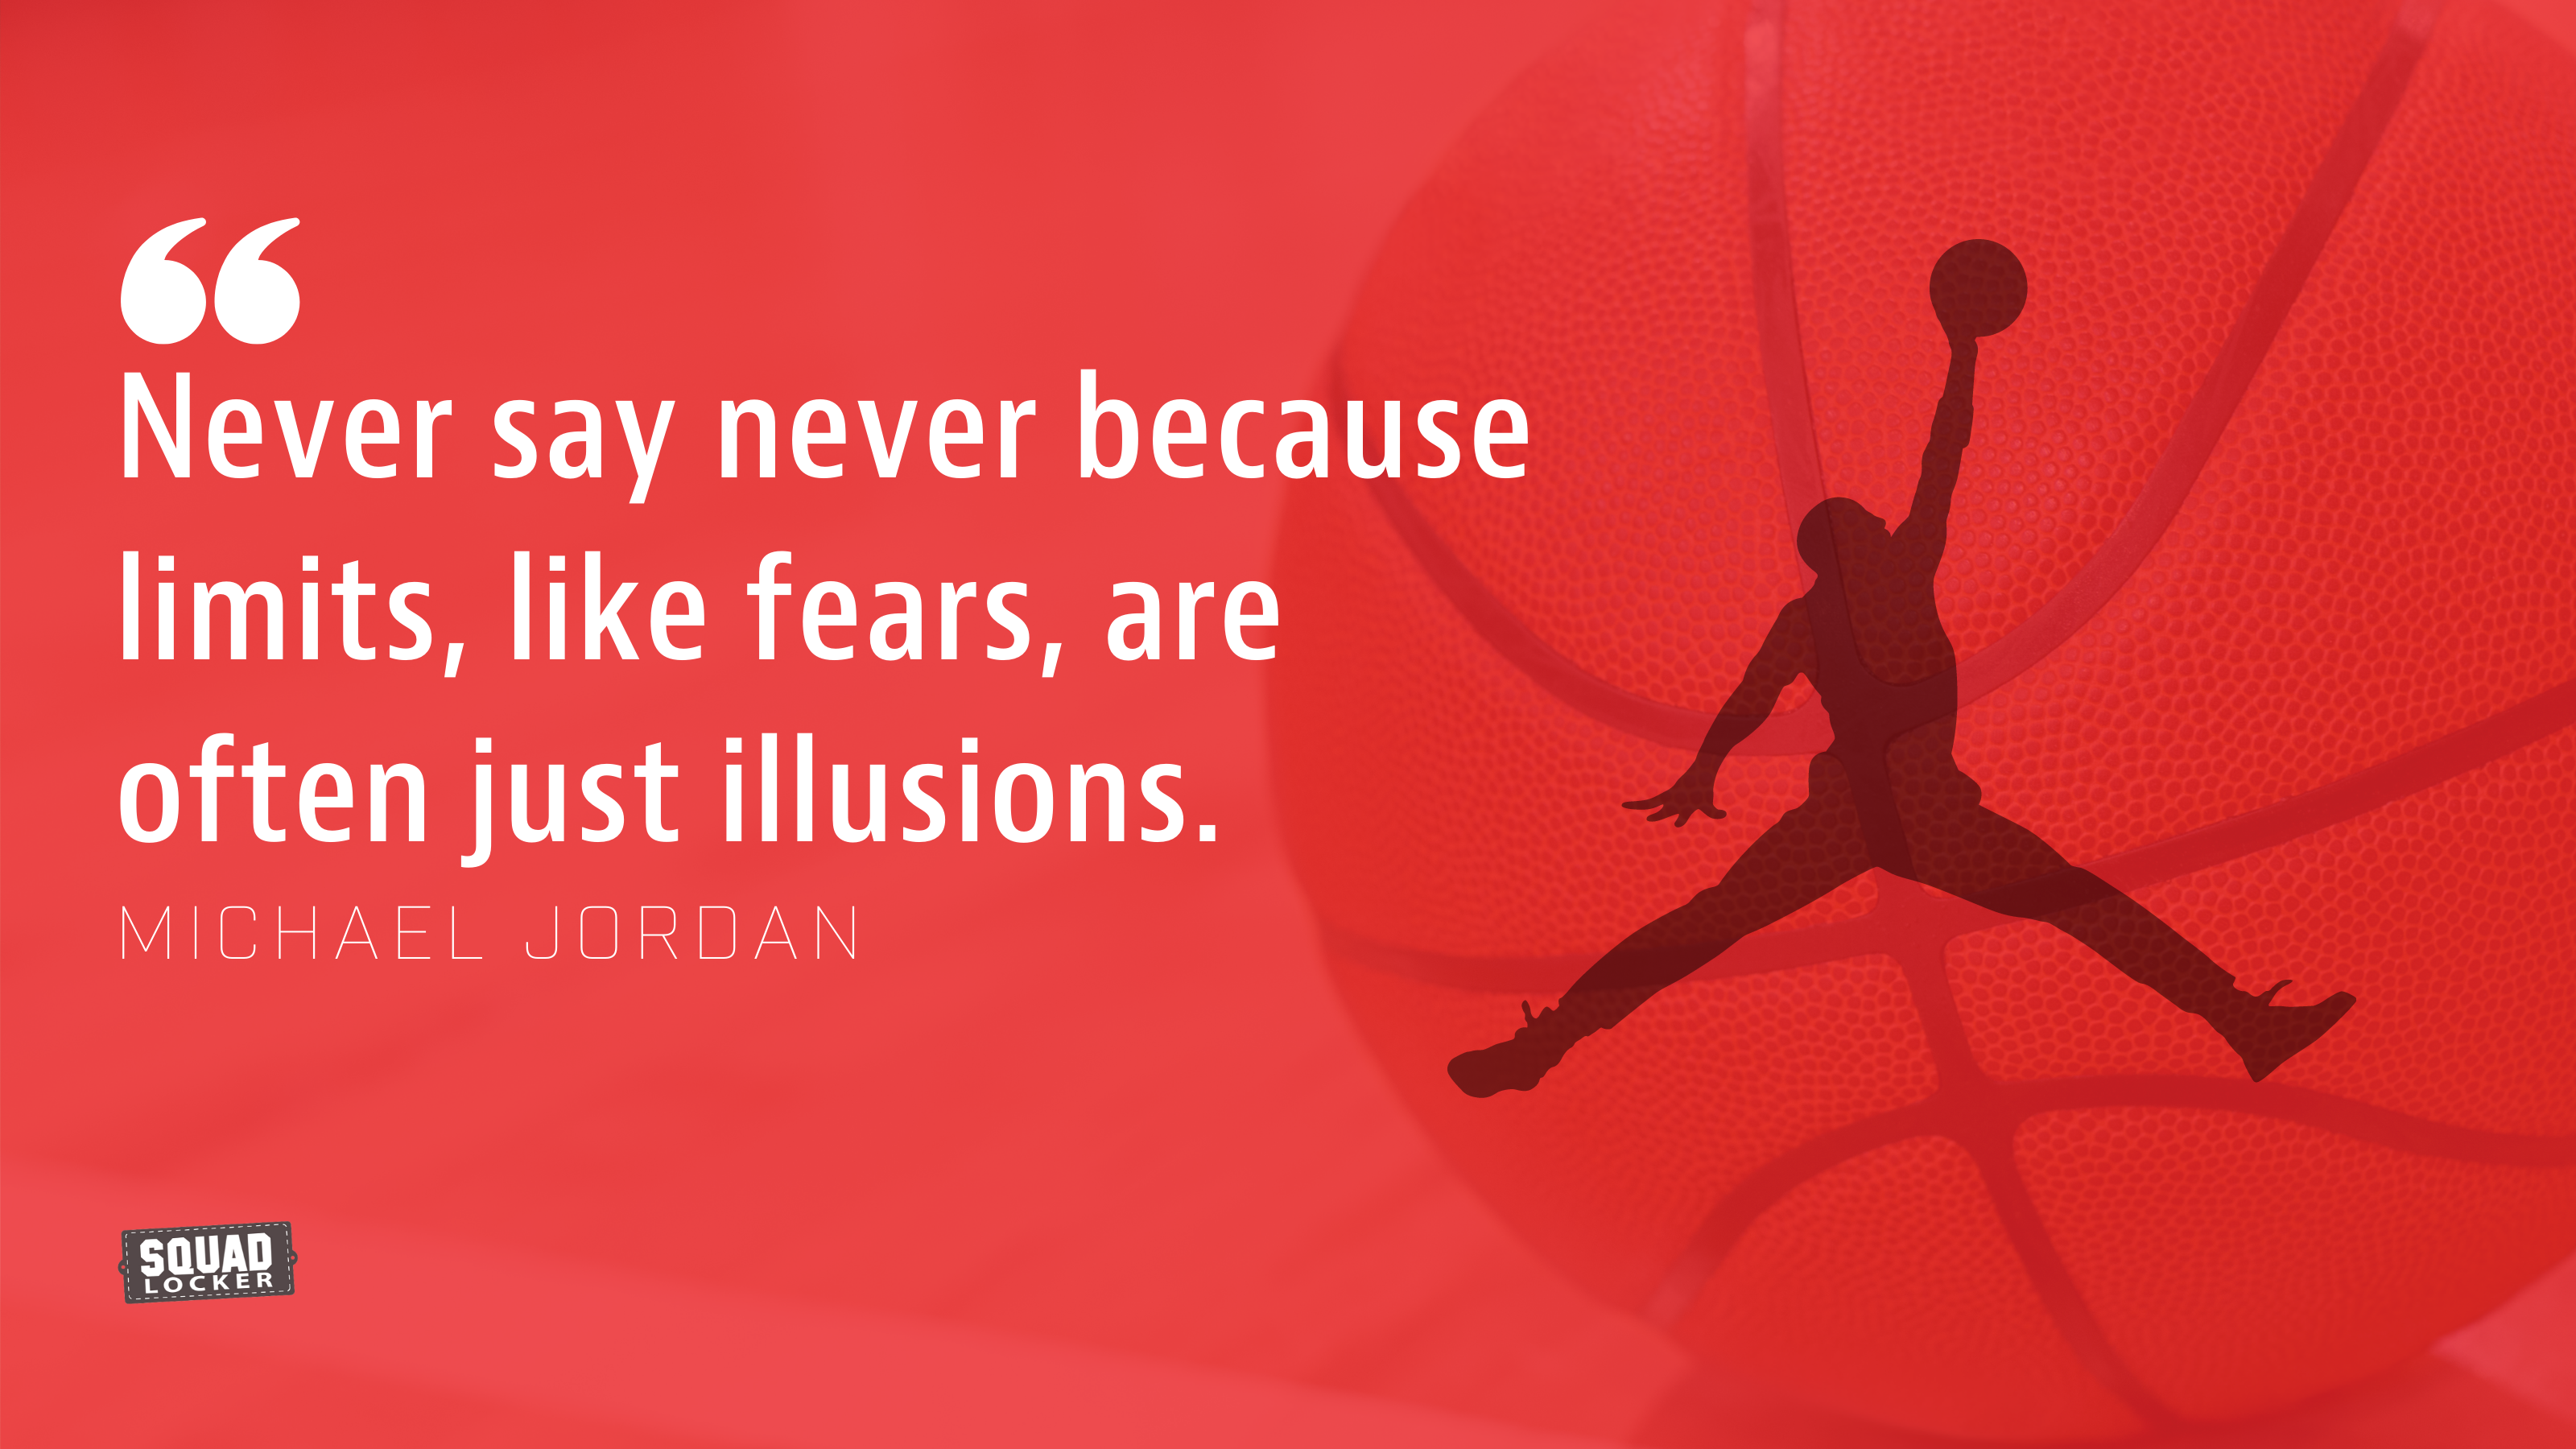 inspirational sports quotes cover photos for facebook